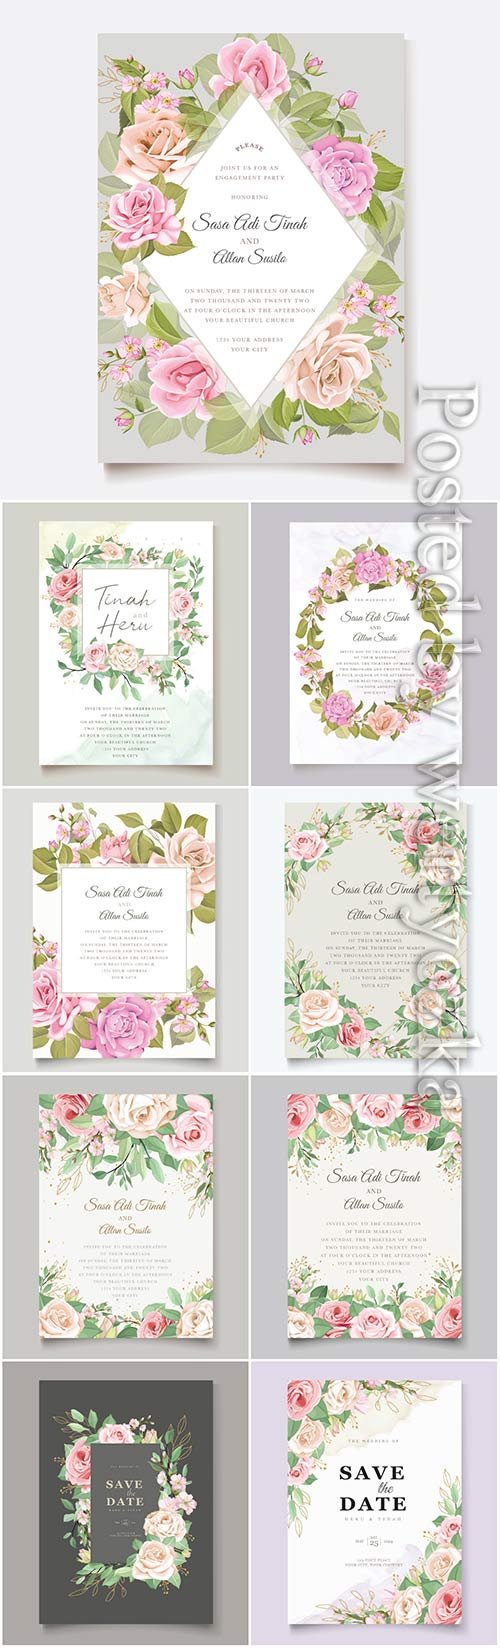 Wedding invitation cards with flowers in vector # 3